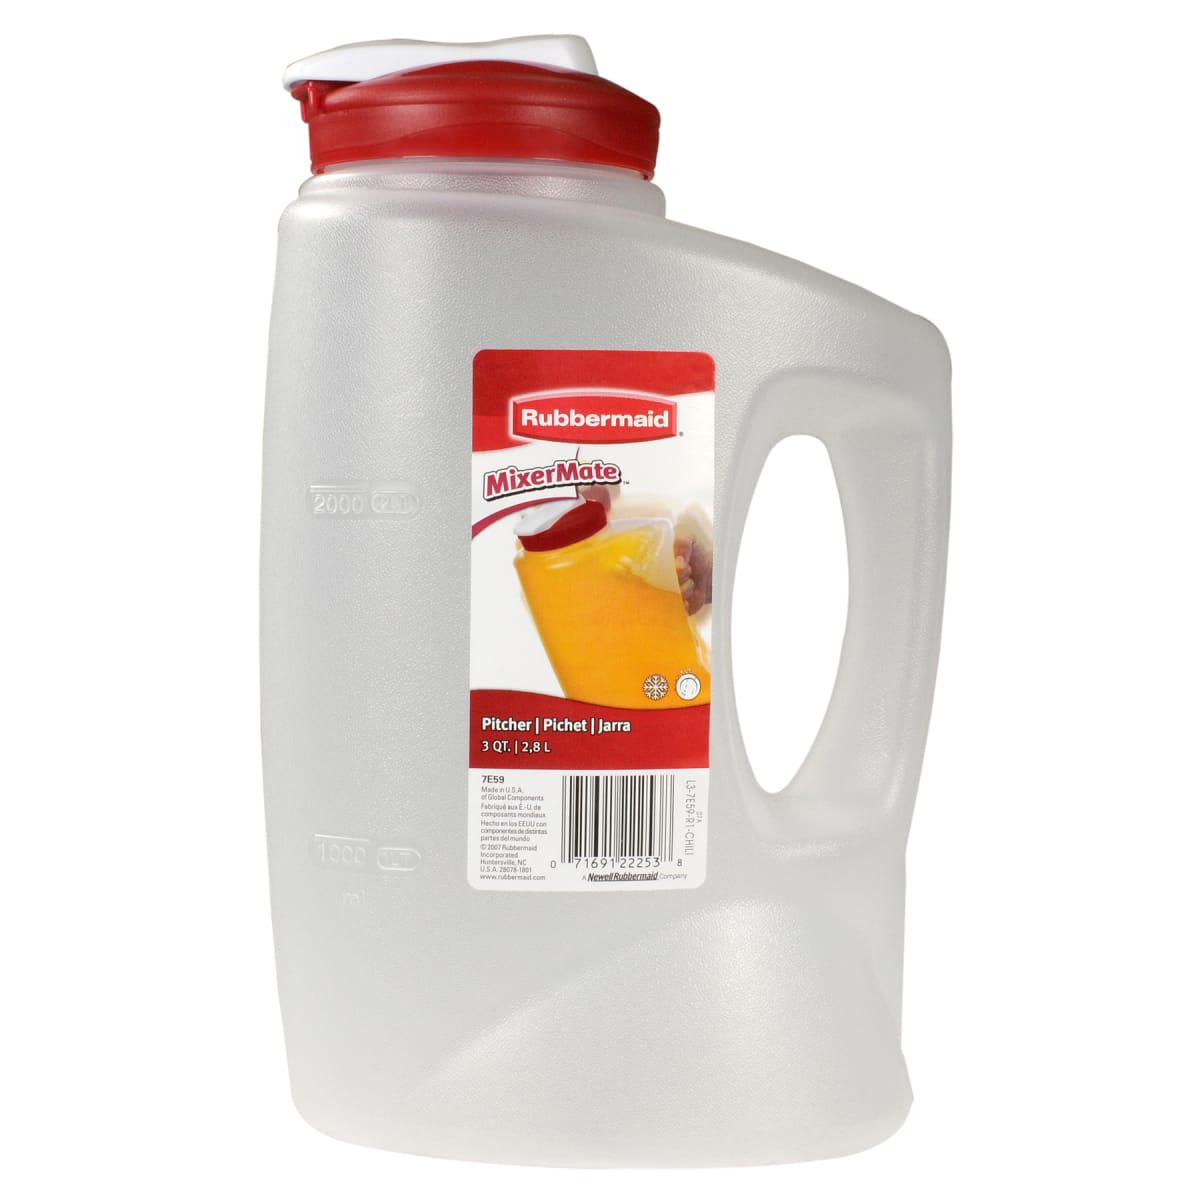 Rubbermaid Mixermate 2 Qt. Pitcher, Food Storage, Household